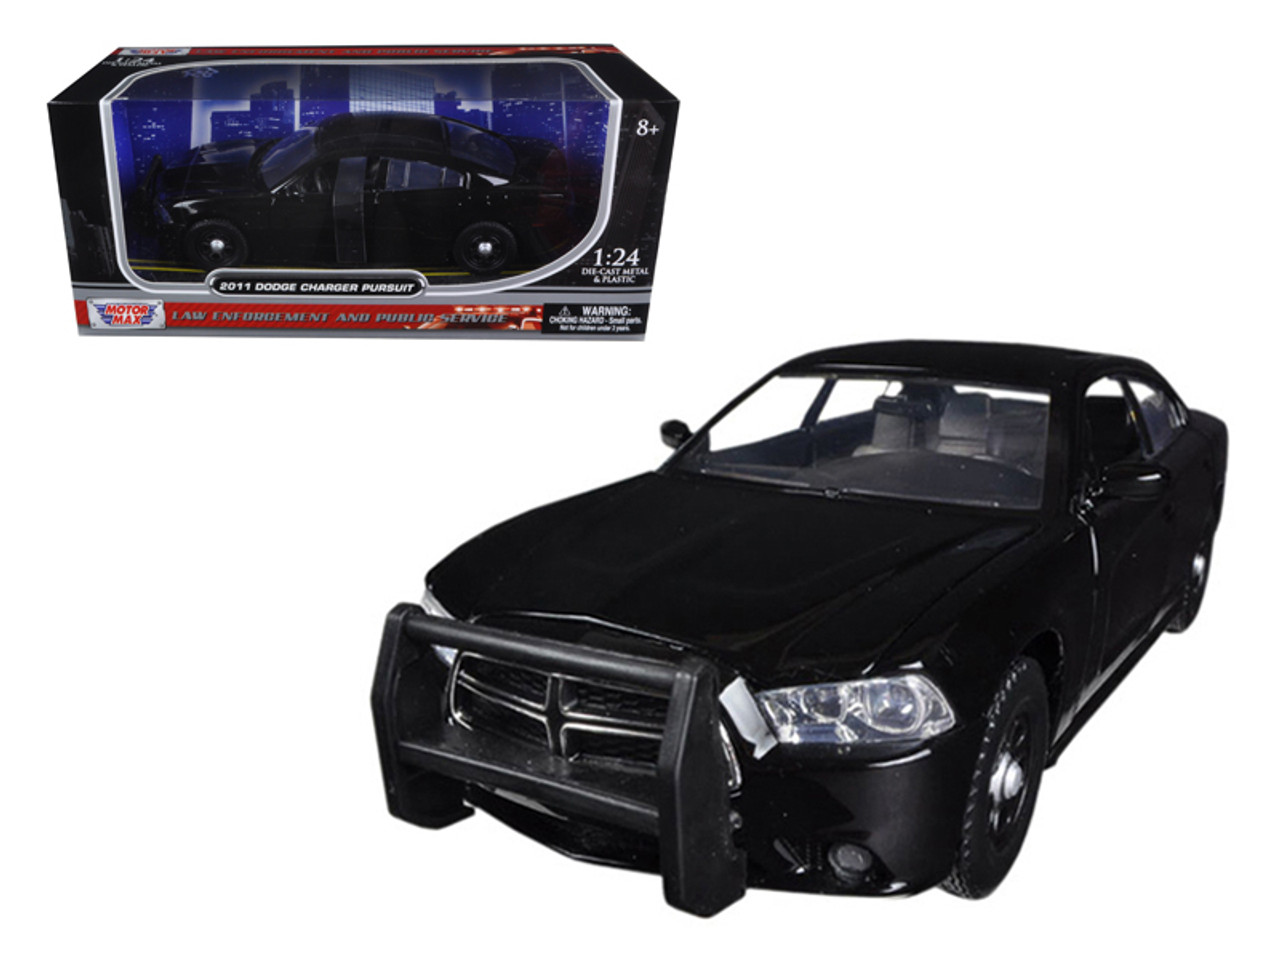 2011 Dodge Charger Pursuit Slick Top Unmarked Police Car Black 1/24 Diecast Model Car by Motormax